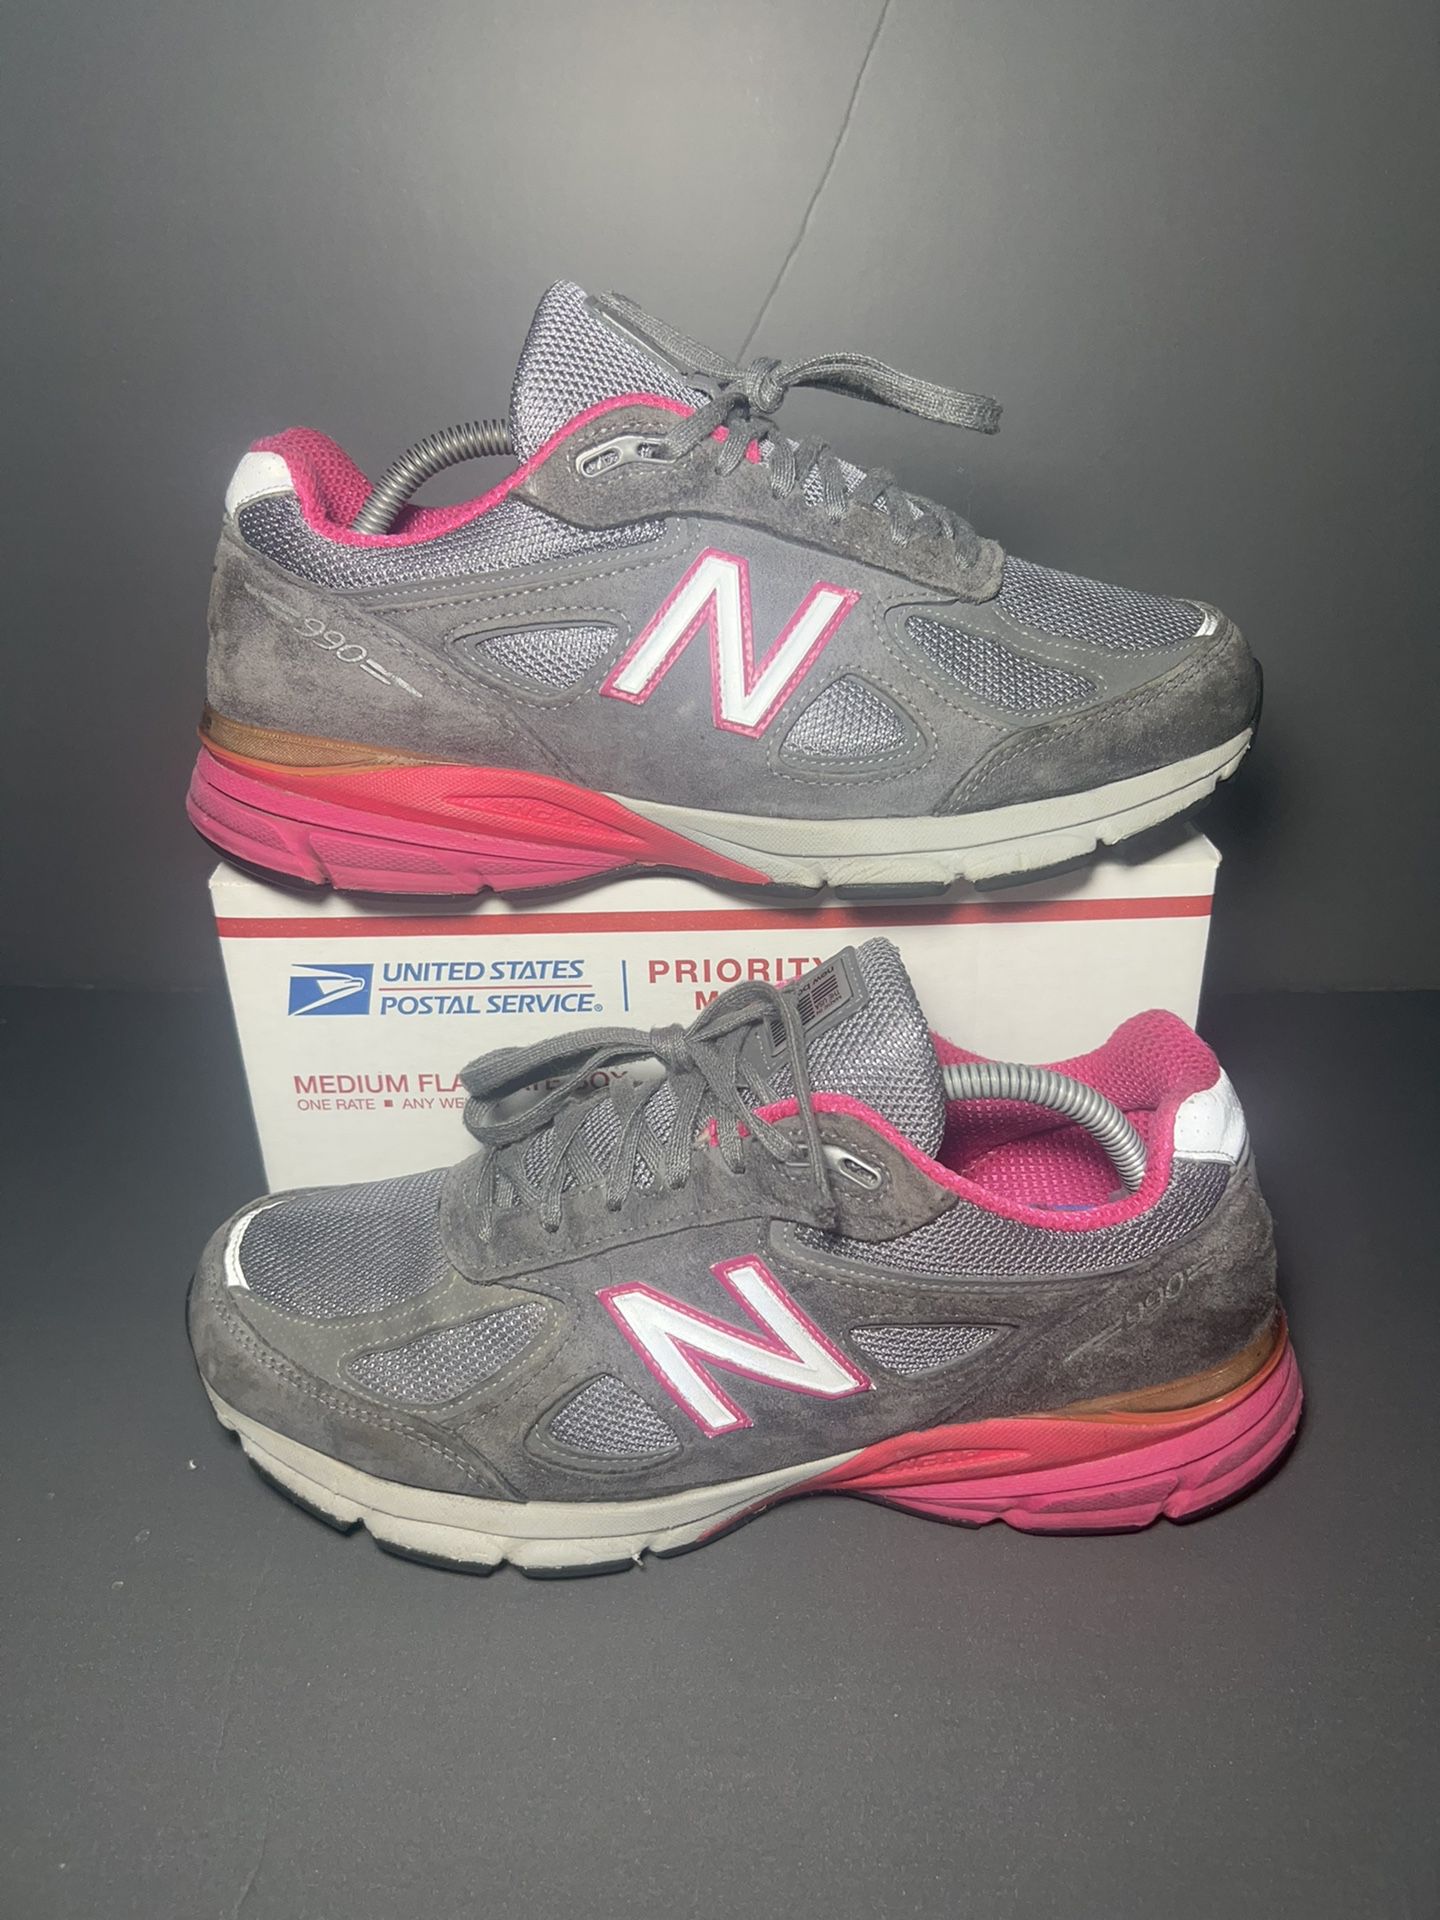 Piñón veredicto sostén New Balance 990v4 Womens Running Shoe Size 11 Made USA W990GP4 Gray Pink 2E  for Sale in The Bronx, NY - OfferUp